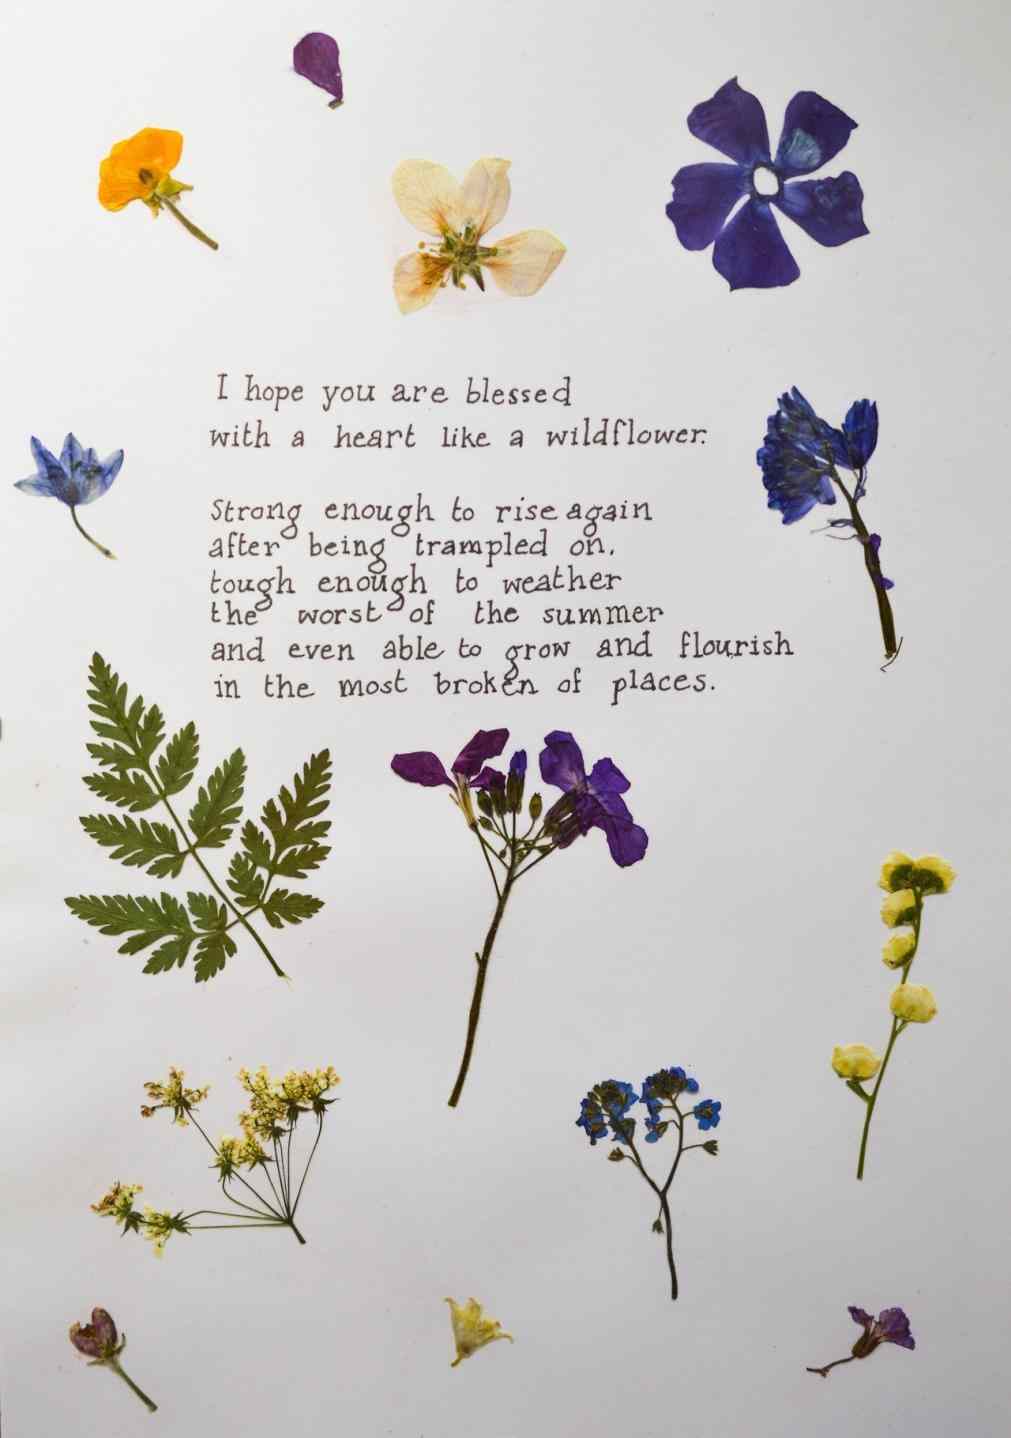 Aesthetic Clipart Iphone 6 Wallpaper Tumblr - Hope You Are Blessed With A Heart Like A Wildflower - HD Wallpaper 